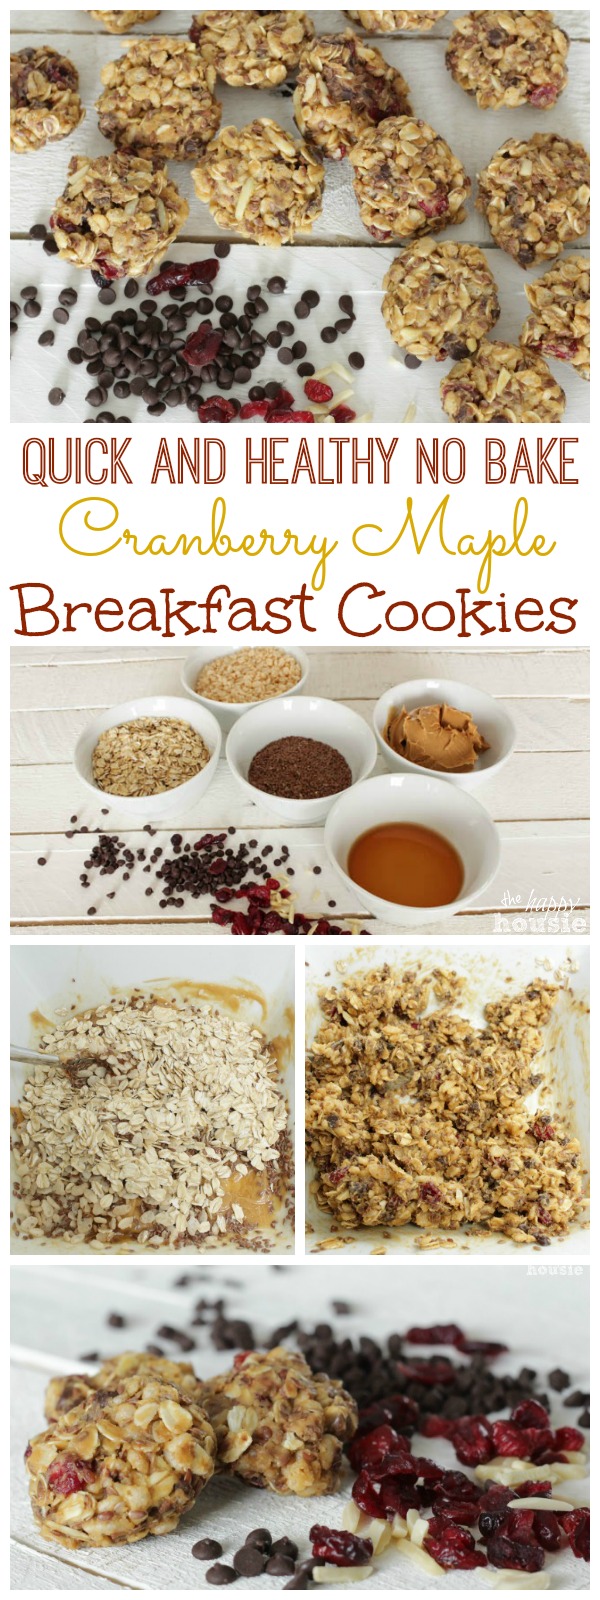 Quick and Healthy Cranberry Maple Breakfast Cookies poster.